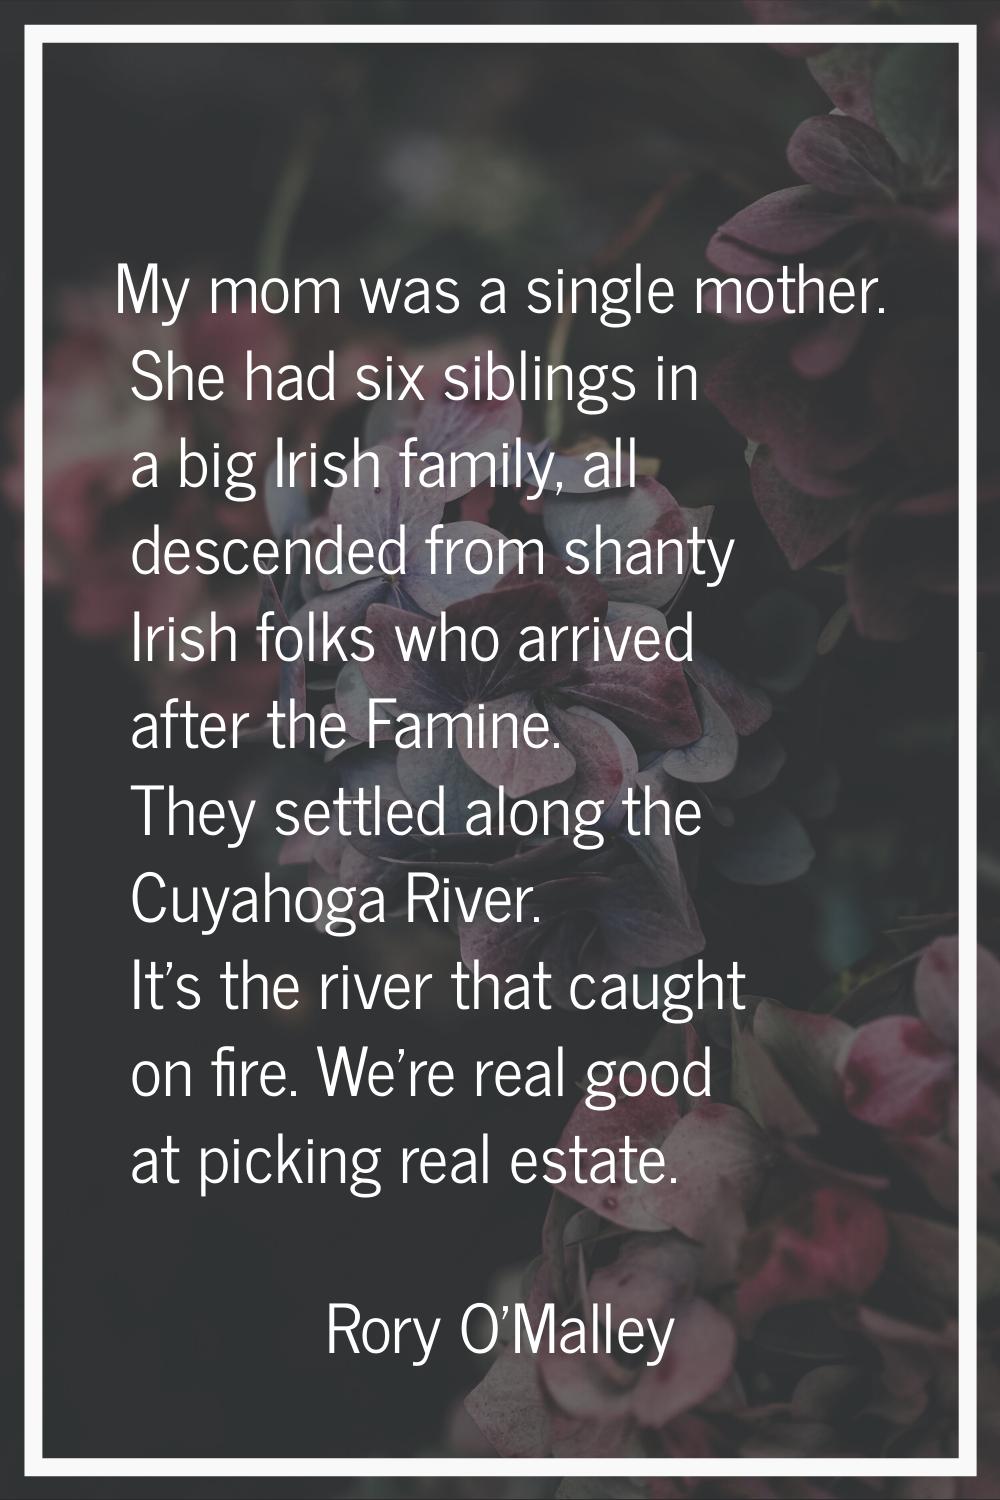 My mom was a single mother. She had six siblings in a big Irish family, all descended from shanty I